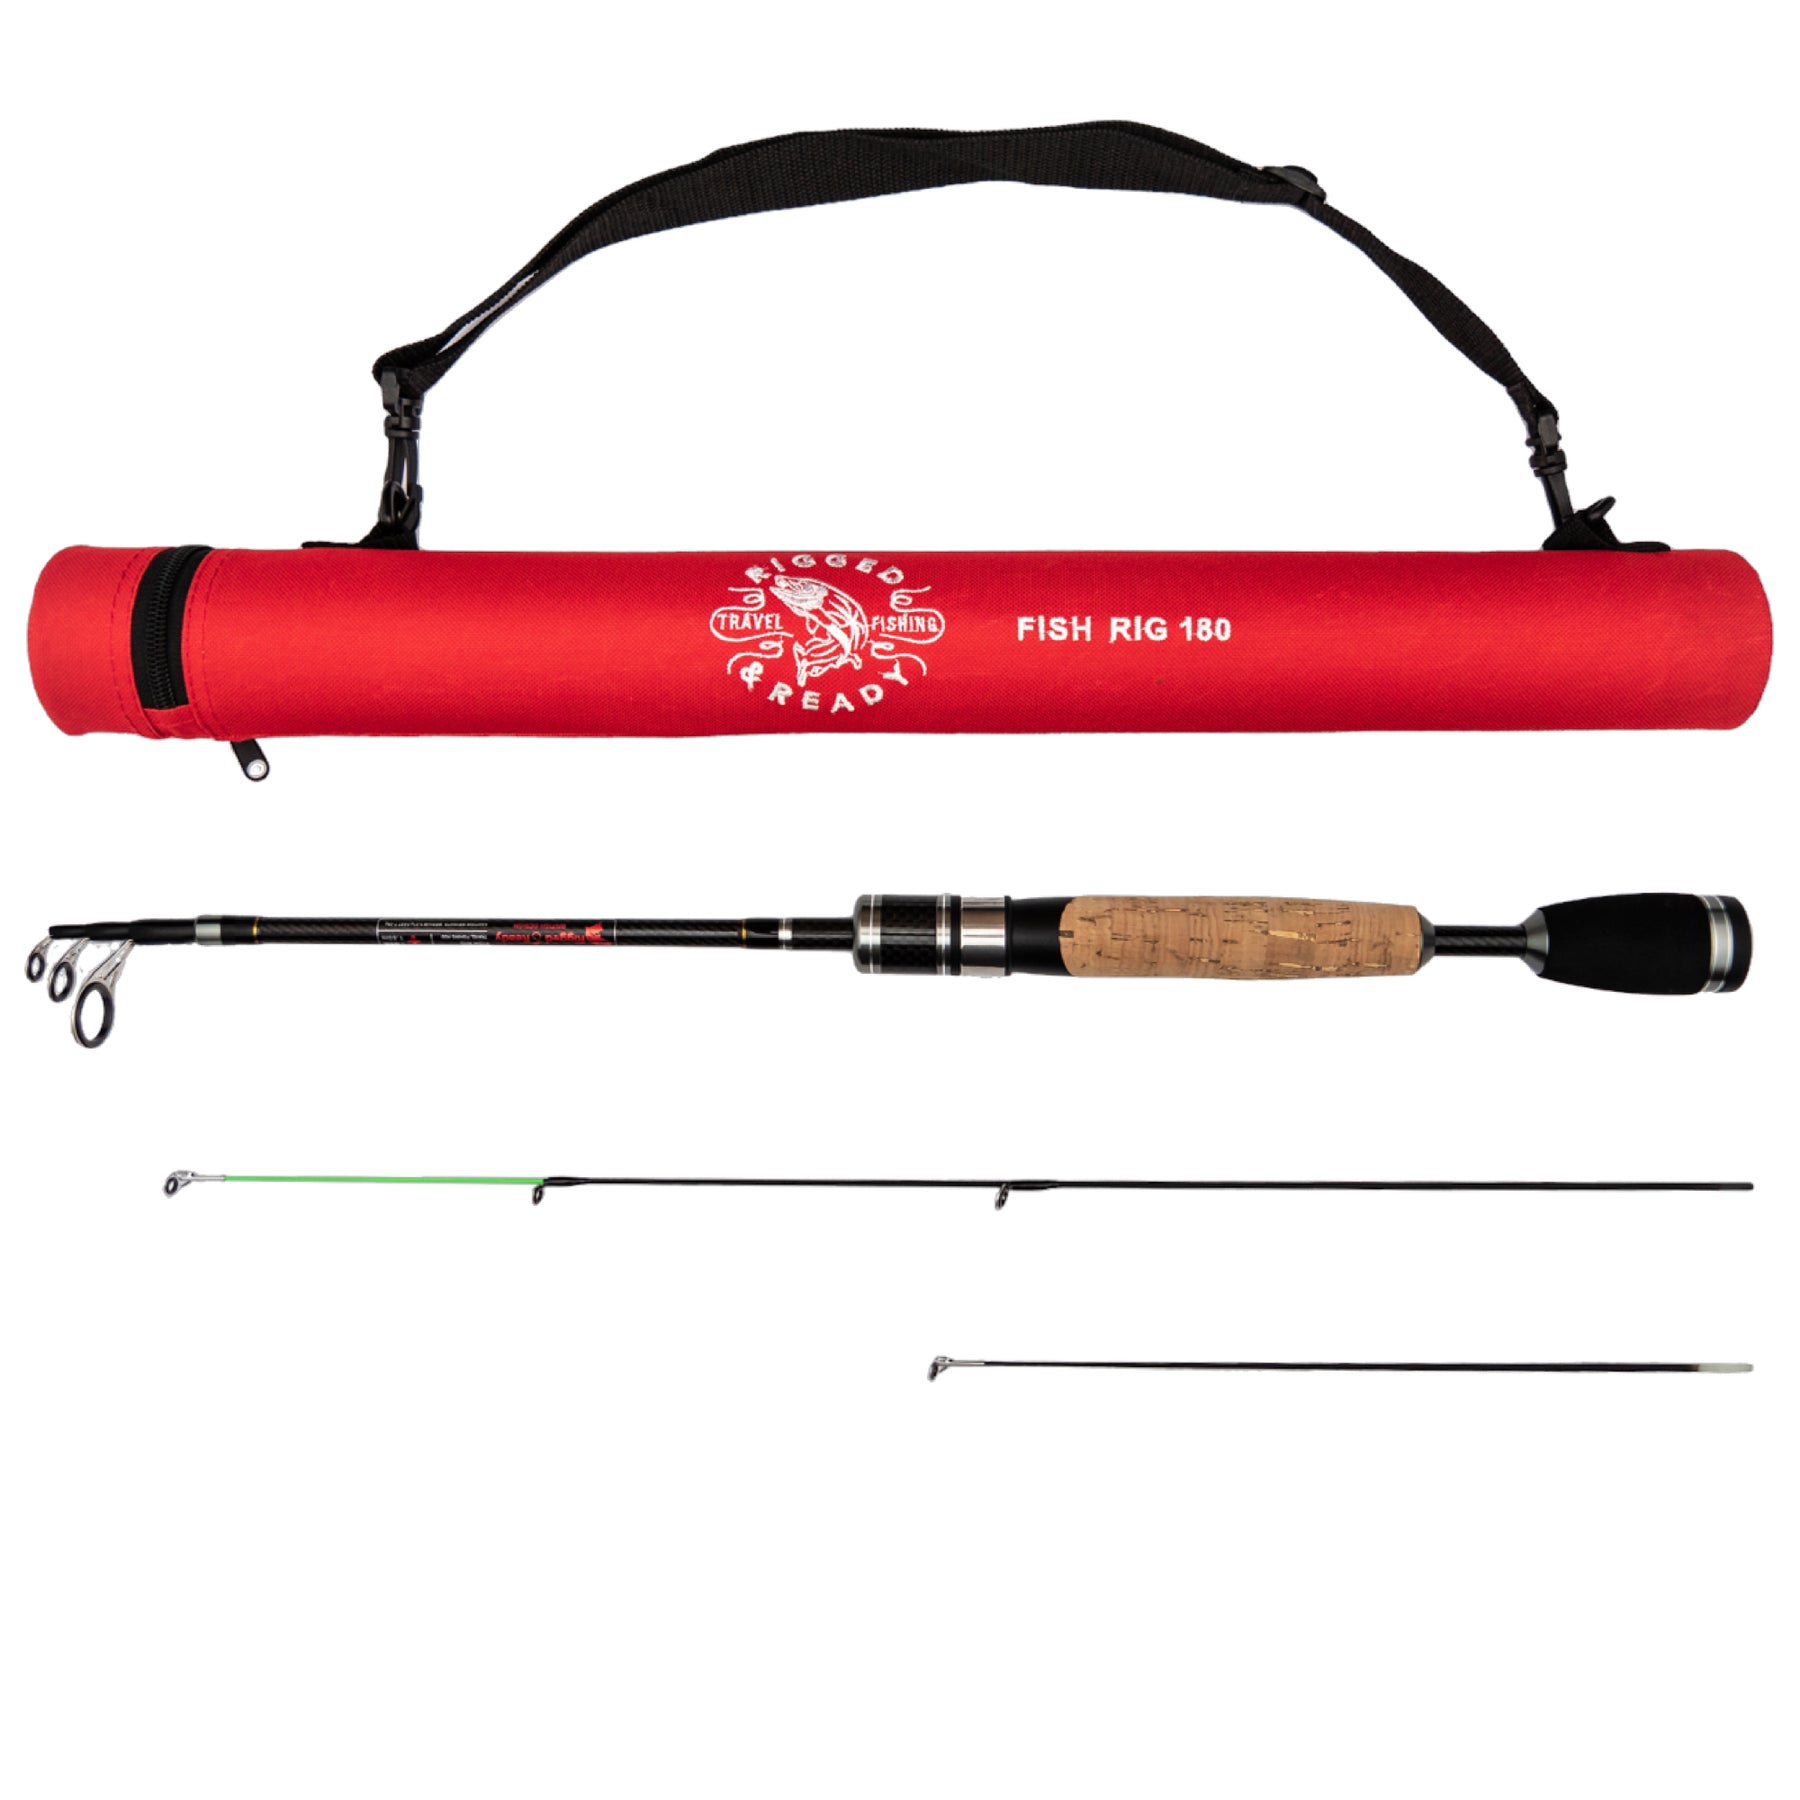 Fish Rig 180 Super LIghtweight Tele Rod + 2 tips = 180 5'11 & 160cm 5'4 –  Rigged and Ready